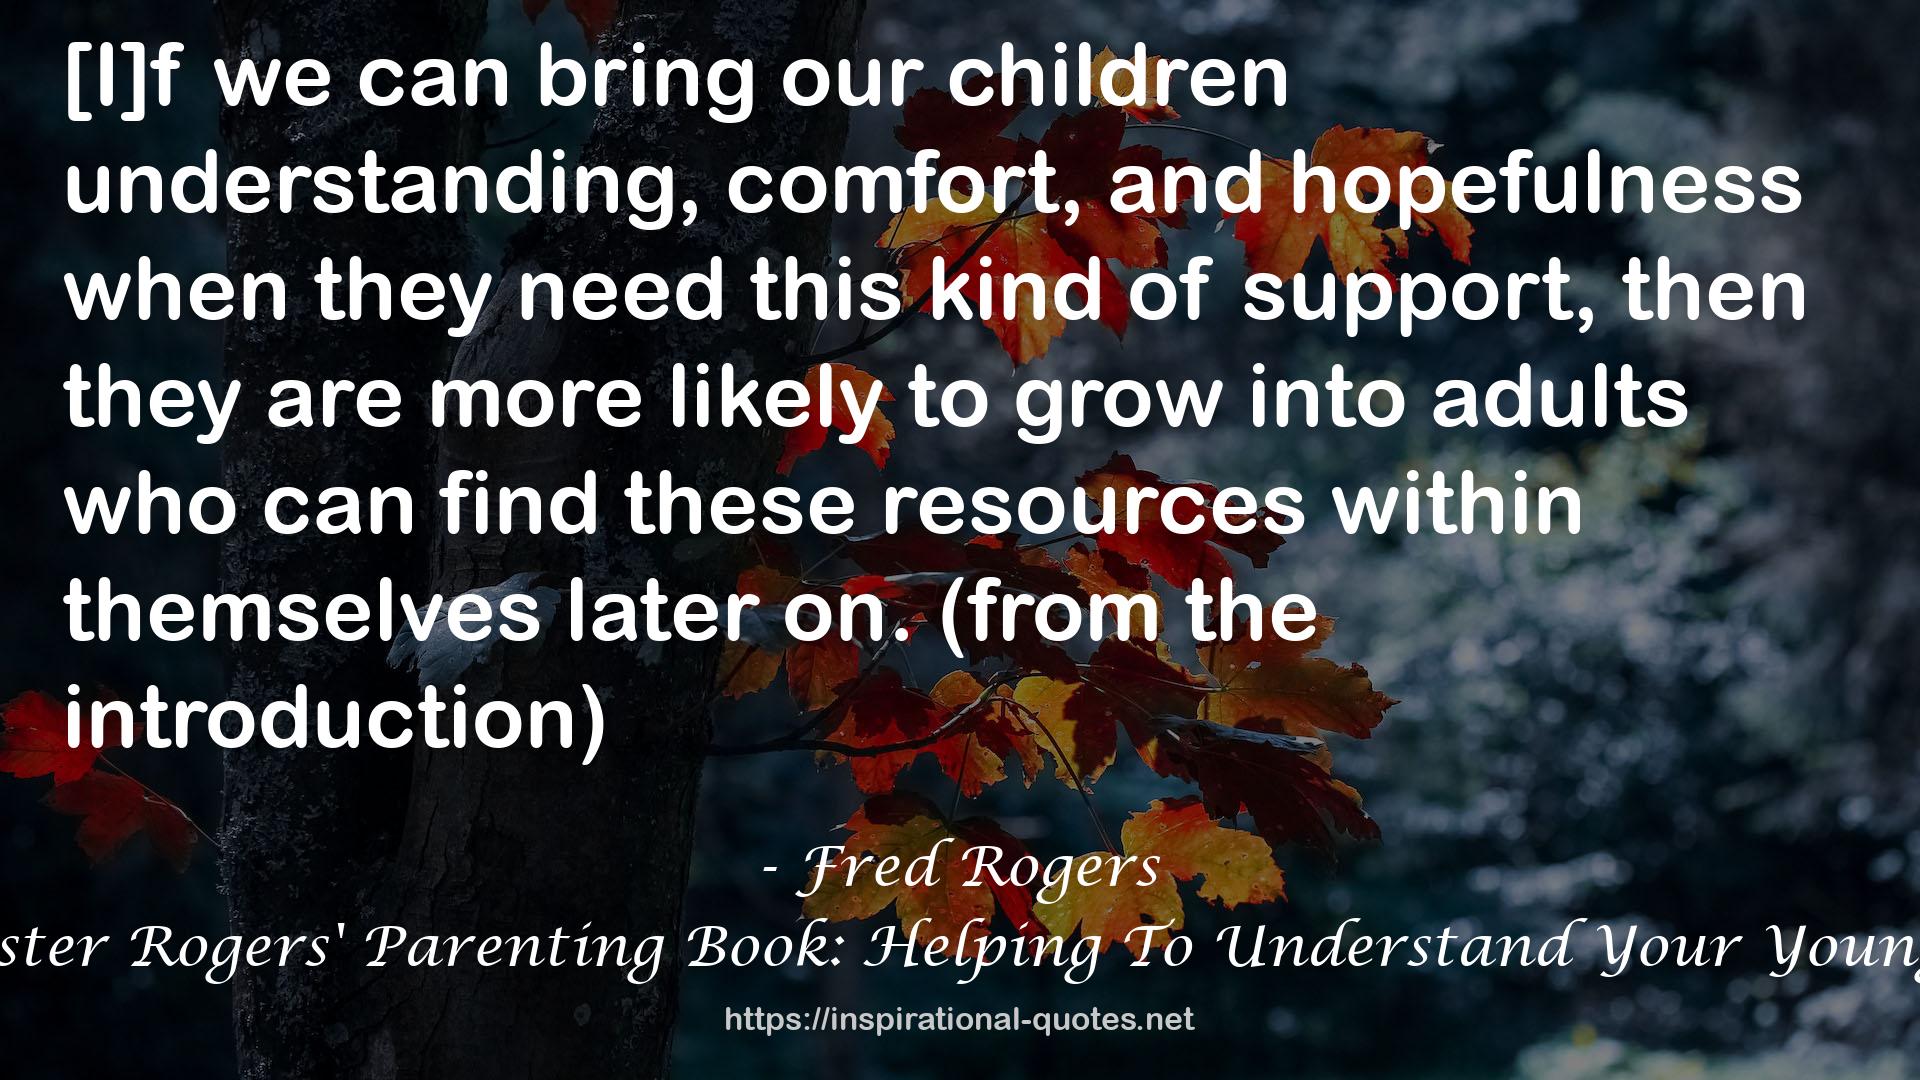 The Mister Rogers' Parenting Book: Helping To Understand Your Young Child QUOTES